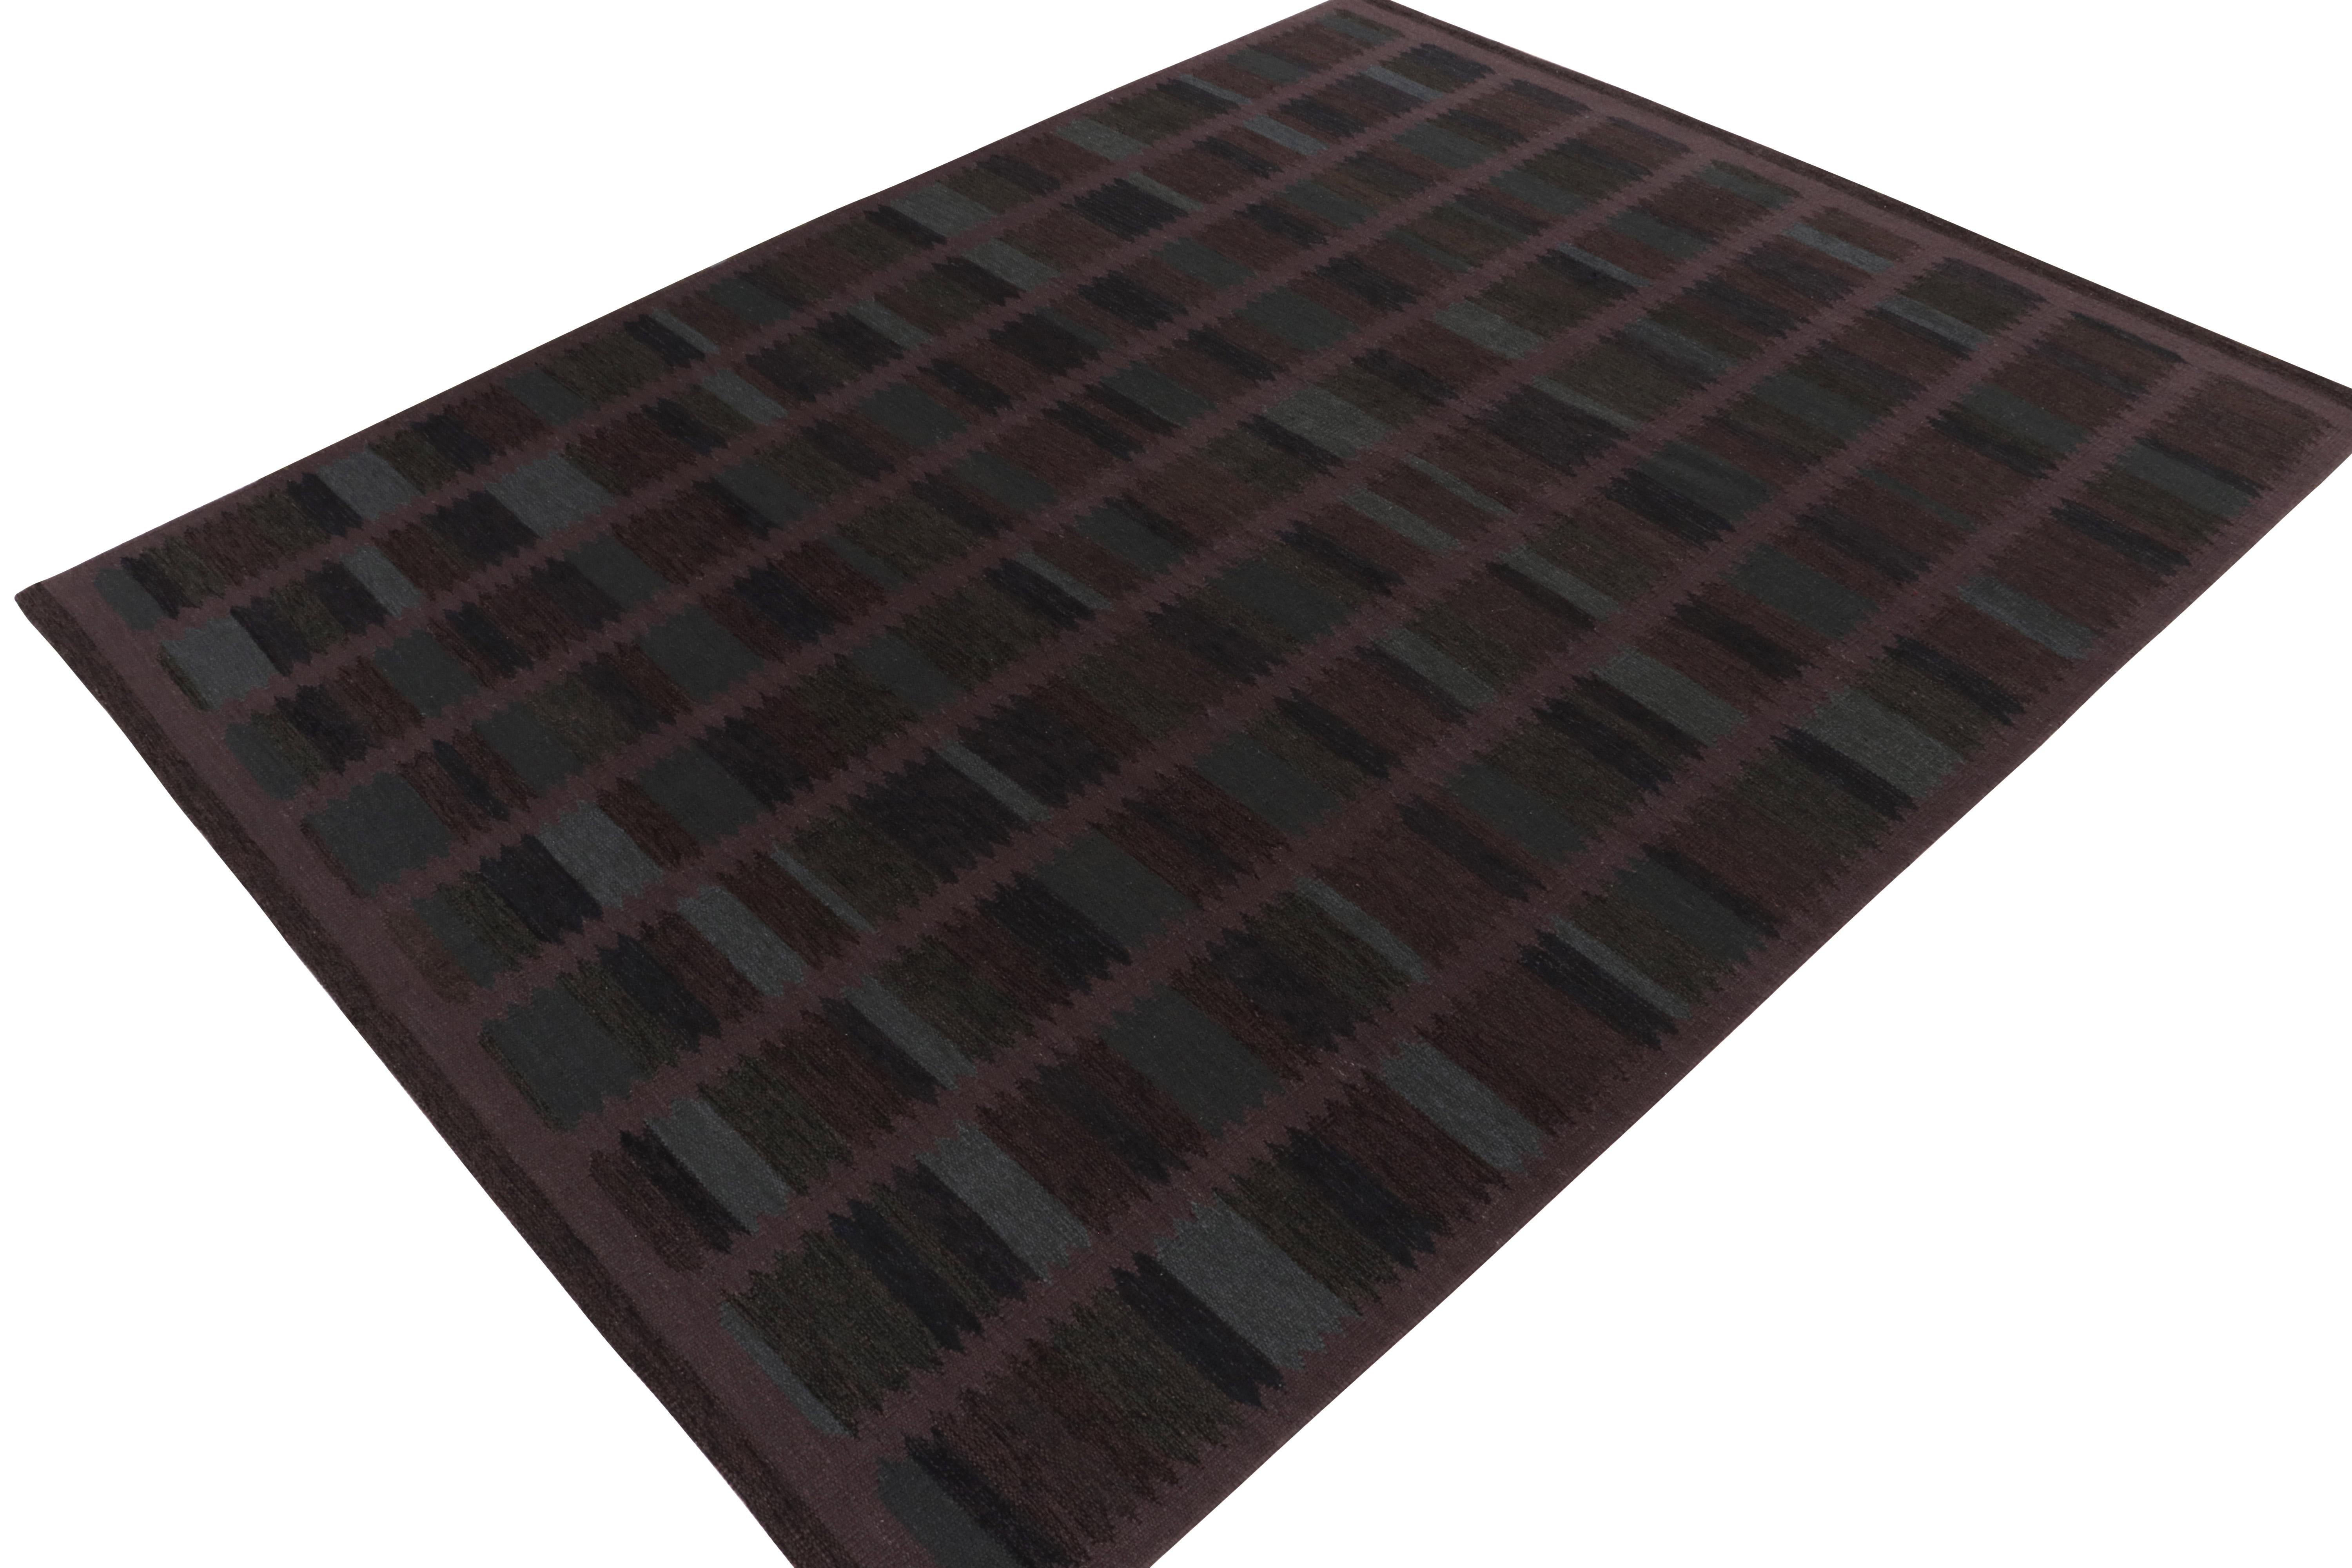 A 10x14 flat weave from Rug & Kilim’s award-winning Scandinavian Kilim collection. 

On the Design: This particular rug enjoys a mature tone with a geometric pattern in purple, brown and blue, further relishing our undyed natural yarns creating an